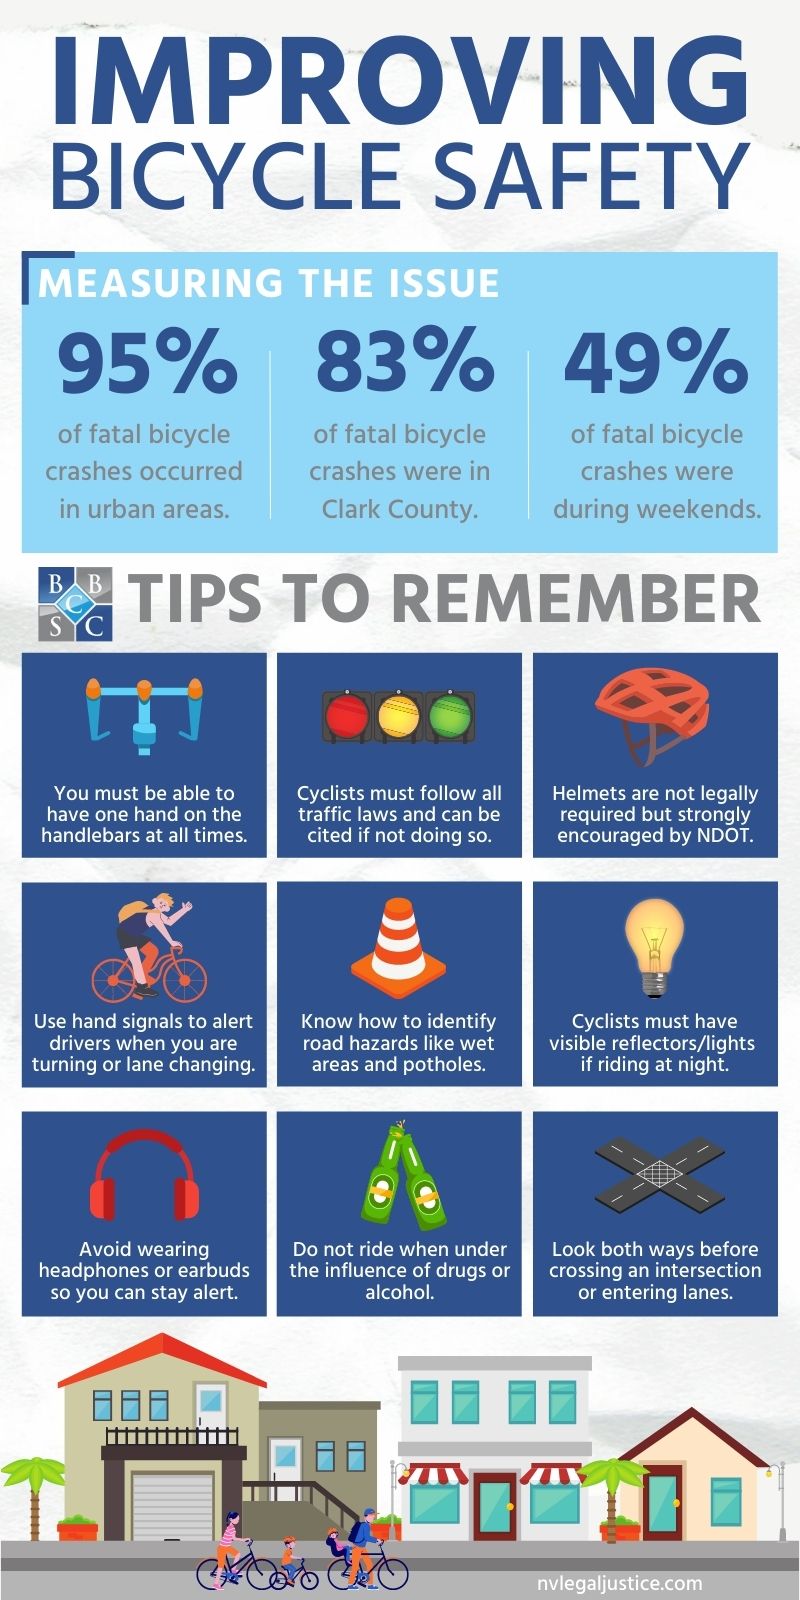 Improving Bicycle Safety Infographic